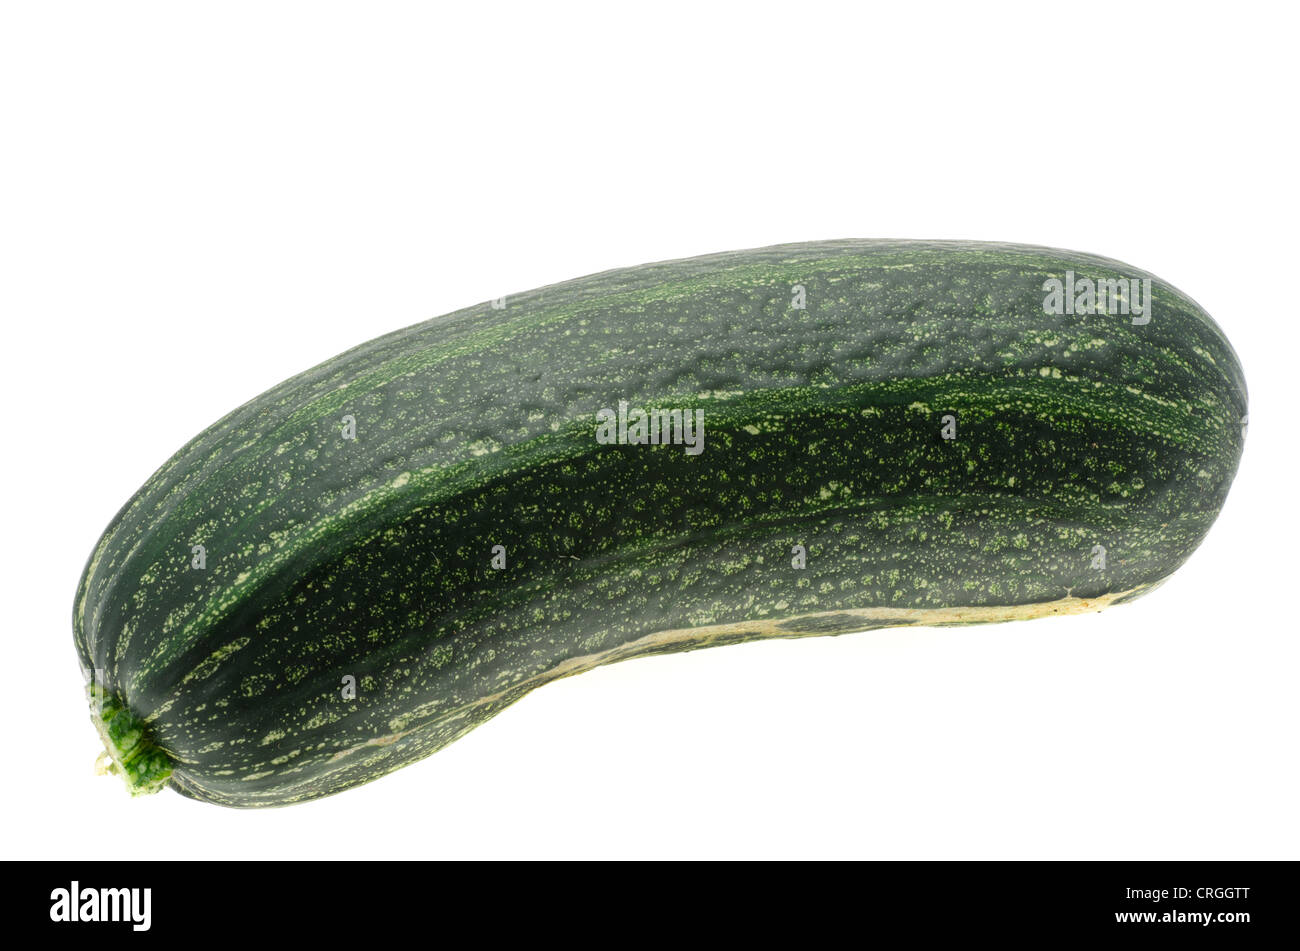 Fresh marrow or summer squash - studio shot with a white background Stock Photo